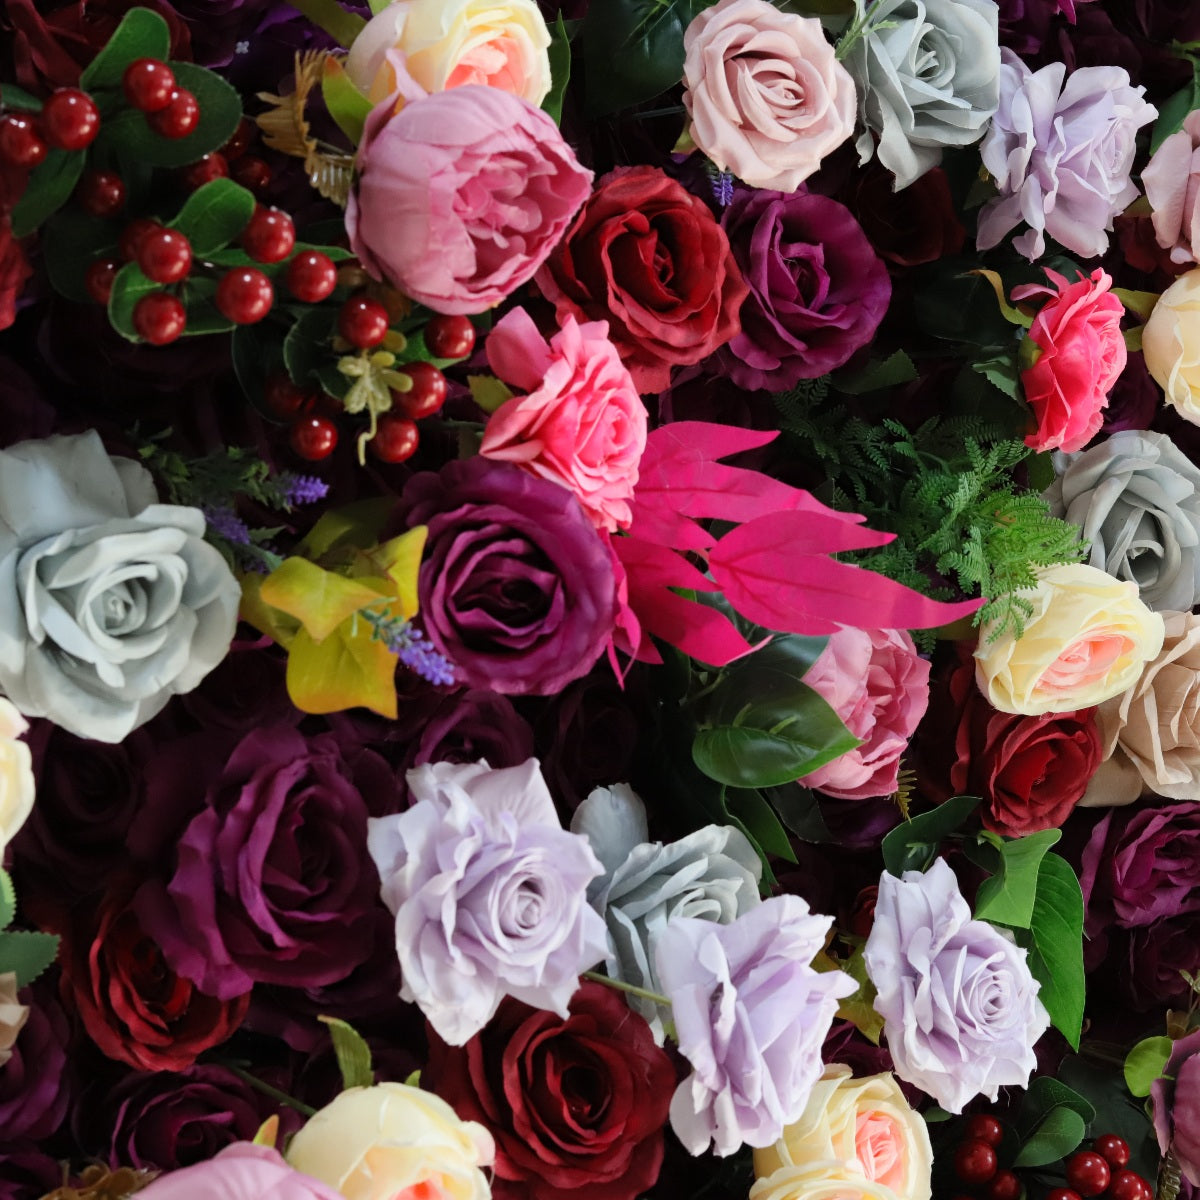 The purple roses fabric flower wall looks mysterious and elegant.